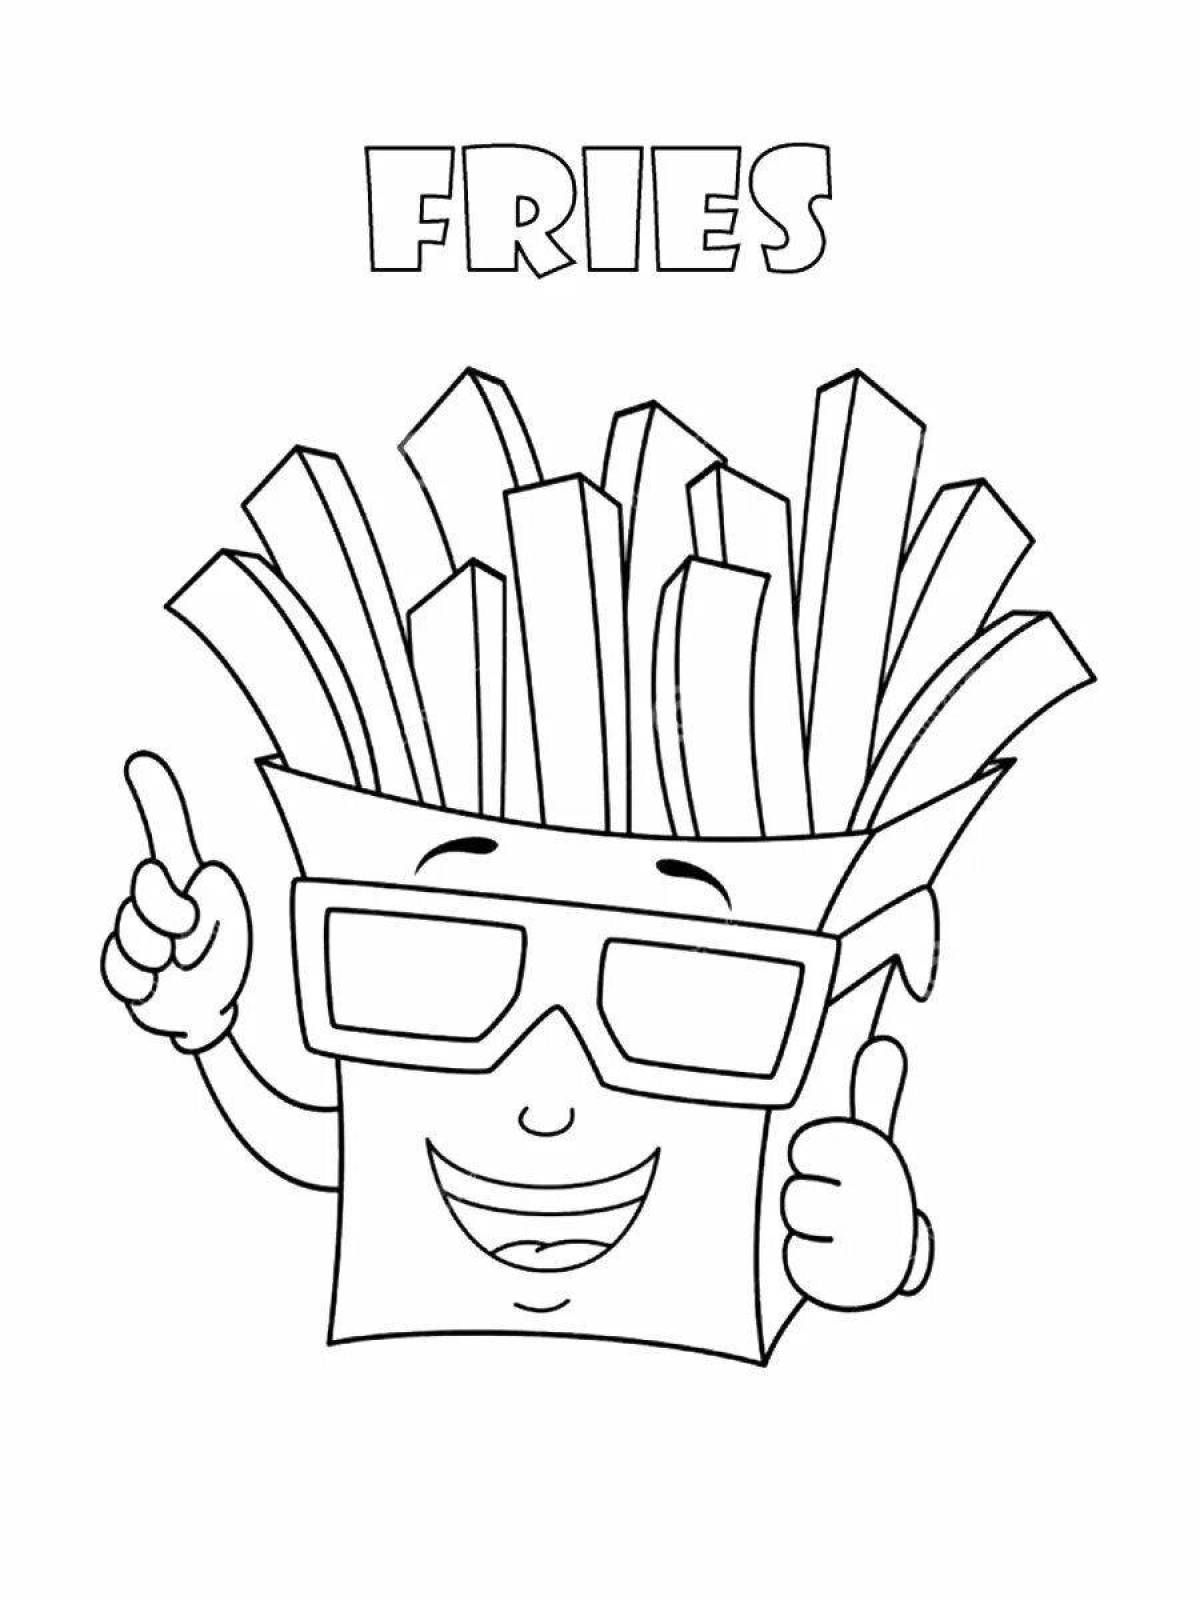 Playful french fries coloring page for kids